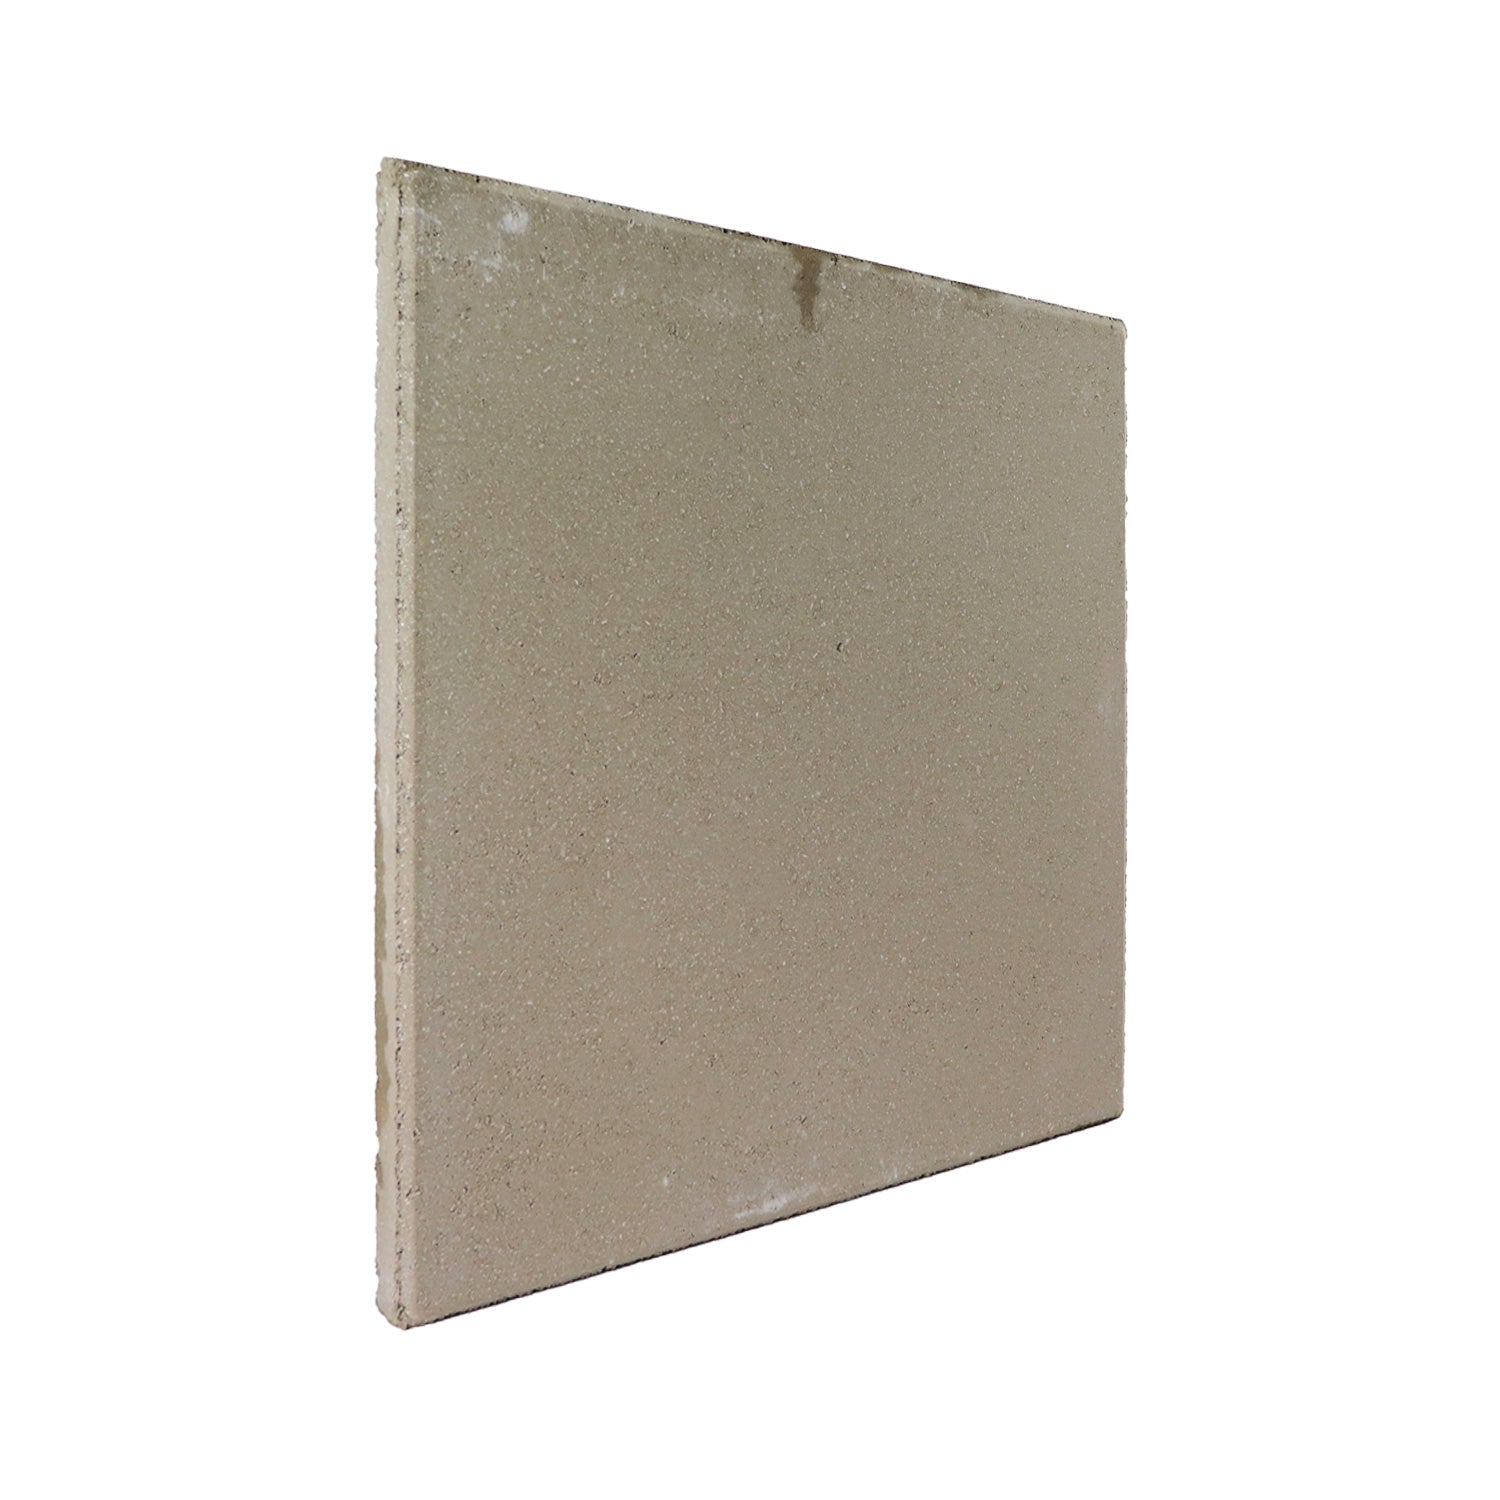 Village Stone Natural Smooth 450mm x 450mm